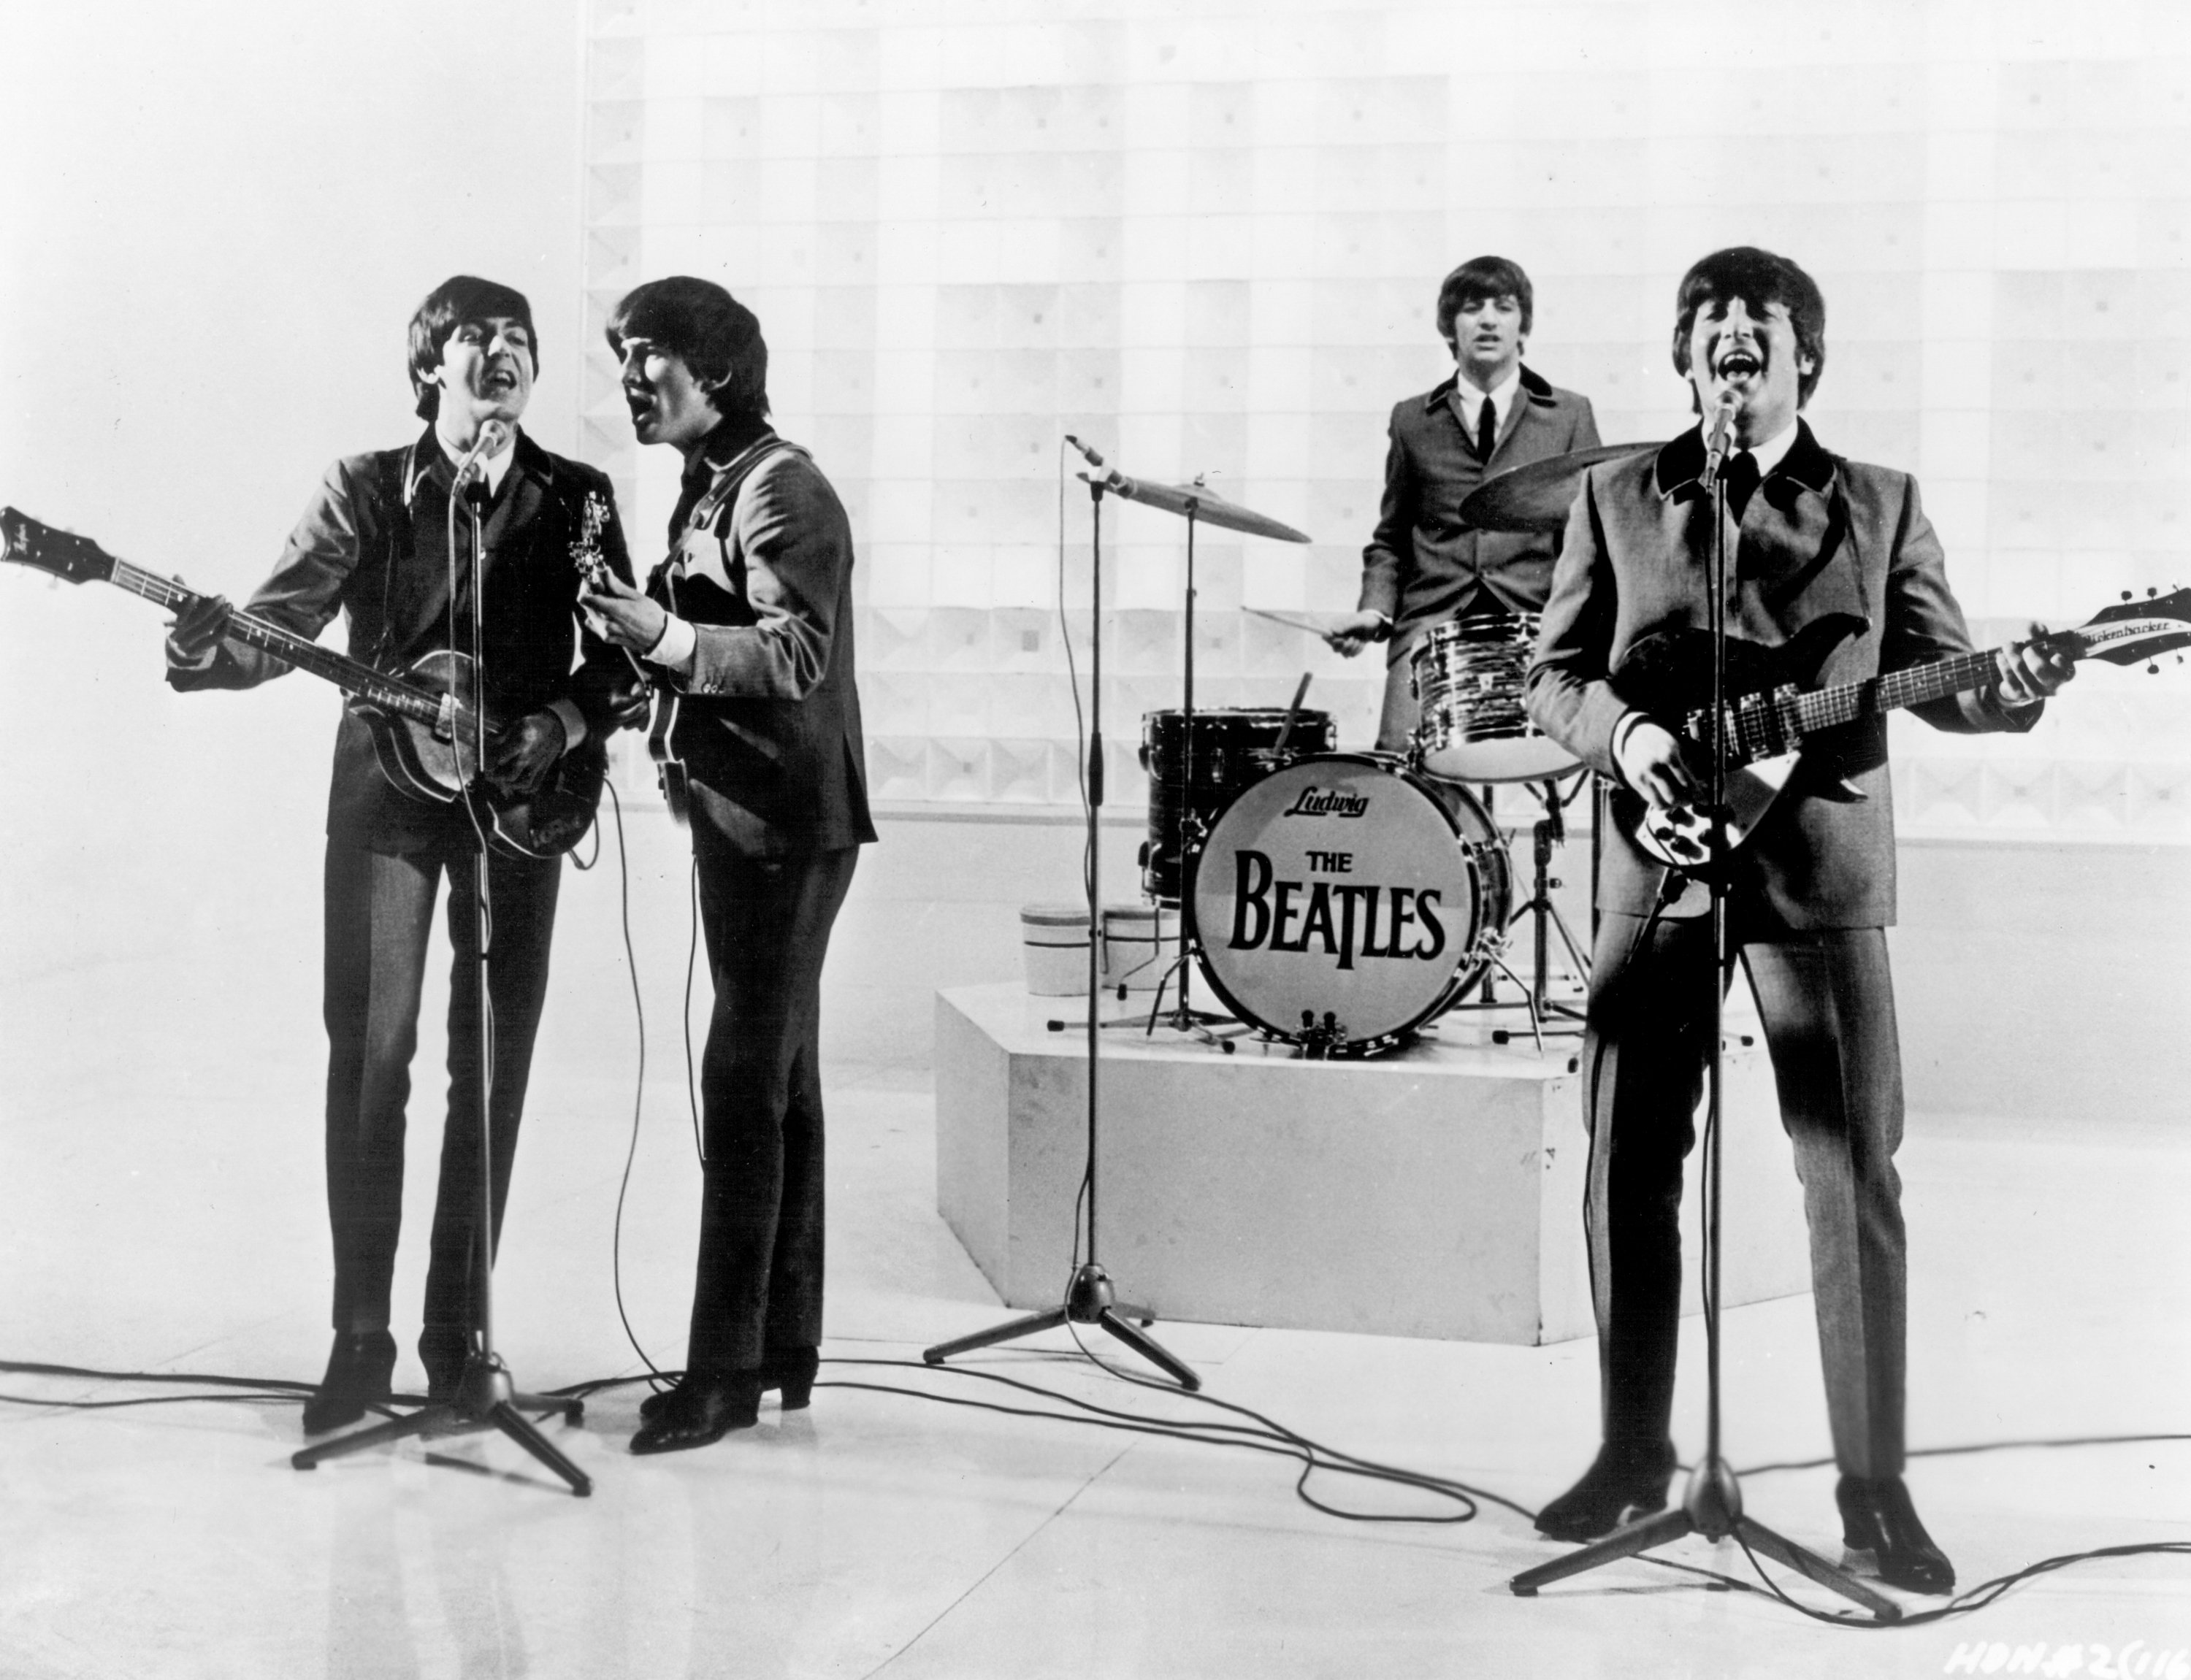 The Beatles playing instruments during the "I Saw Her Standing There" era